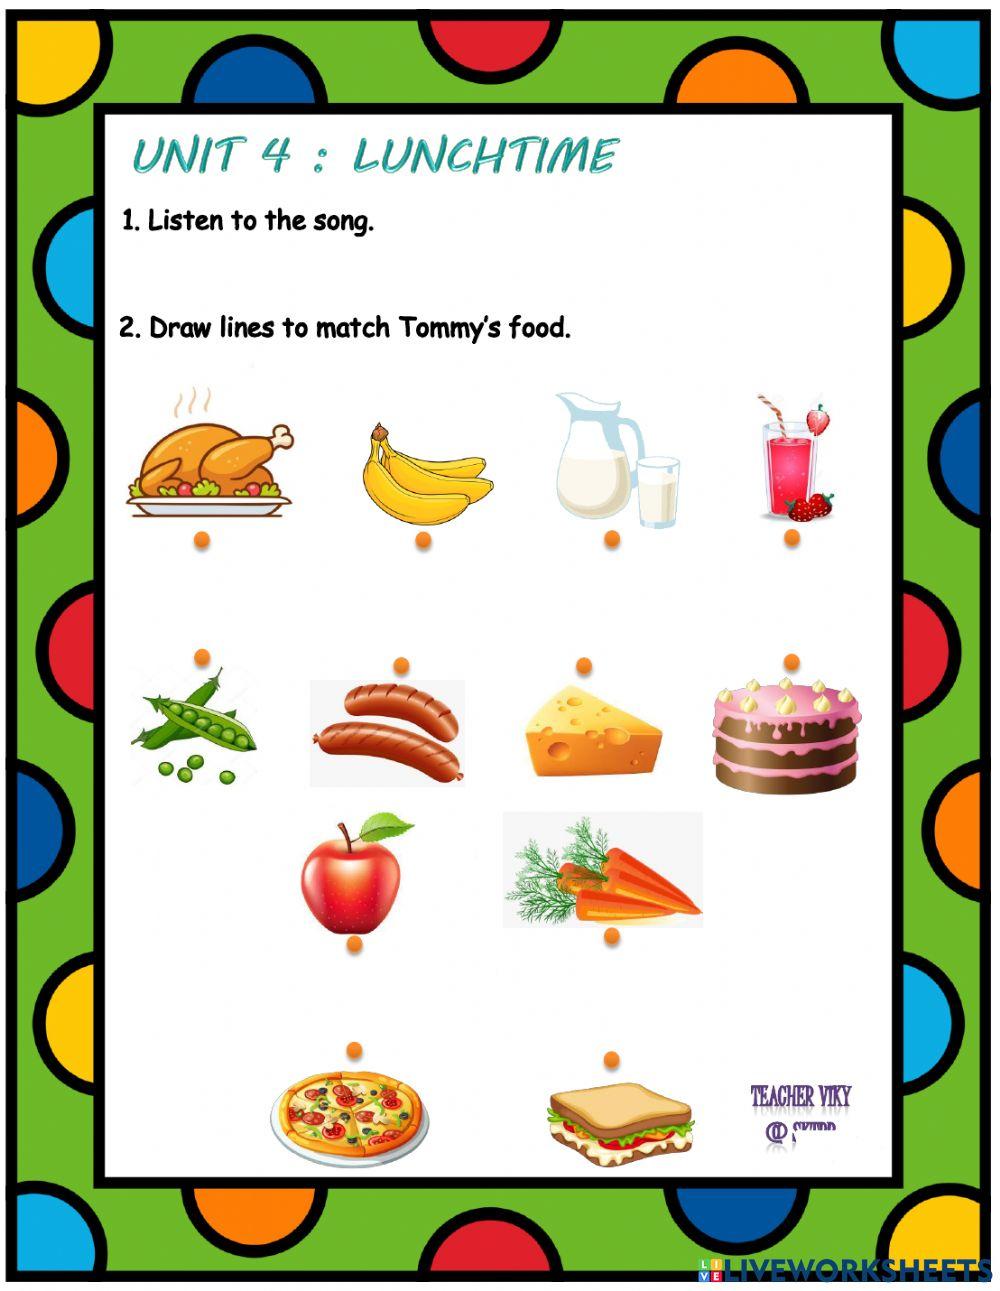 Unit 4 Lunchtime (Song 2)